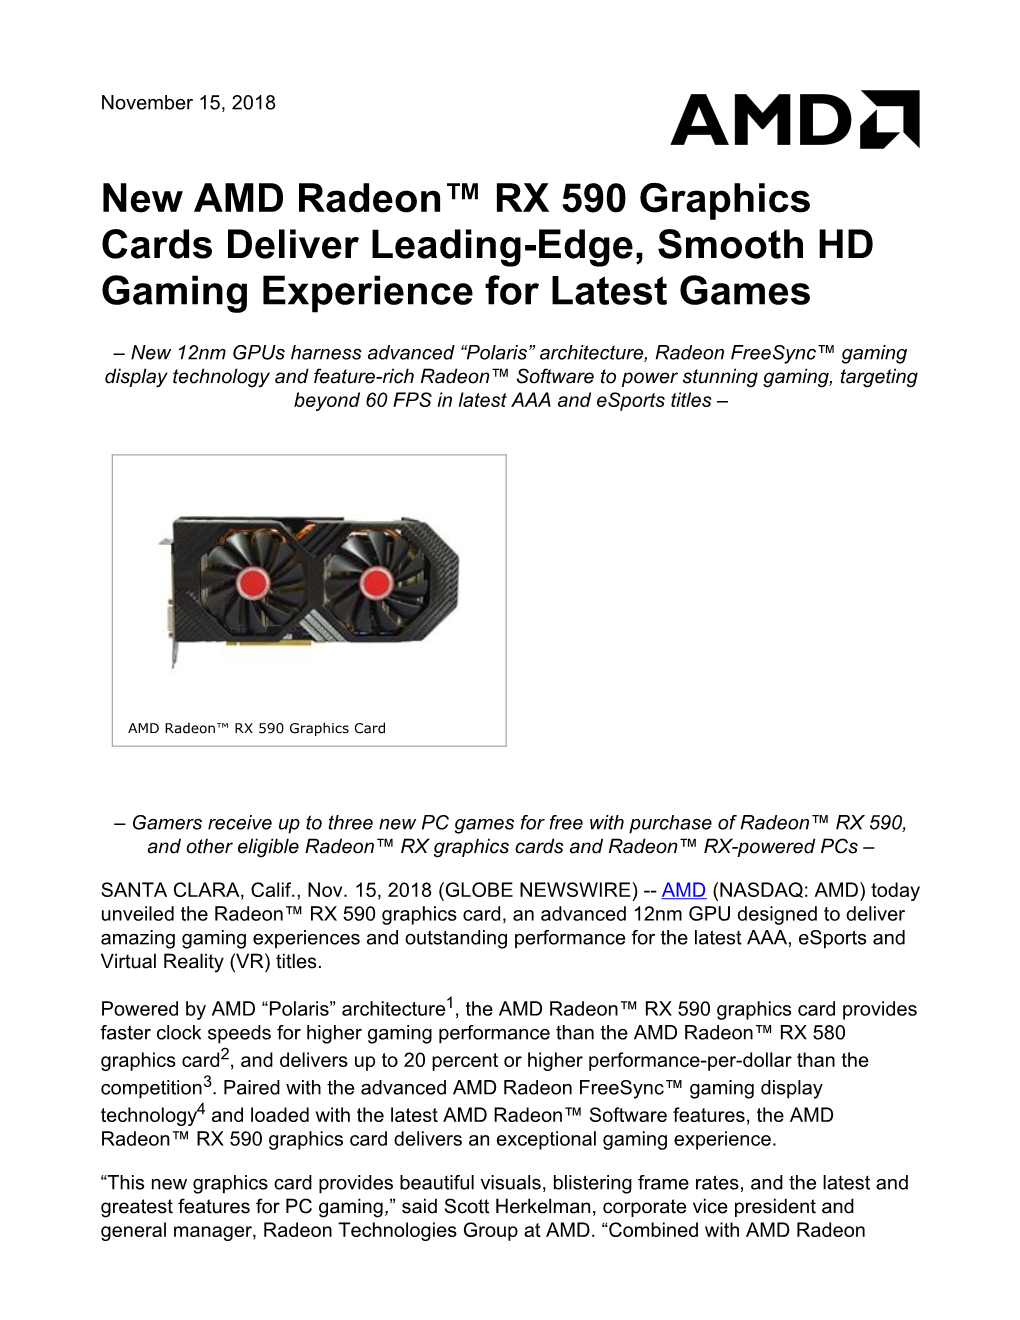 New AMD Radeon™ RX 590 Graphics Cards Deliver Leading-Edge, Smooth HD Gaming Experience for Latest Games